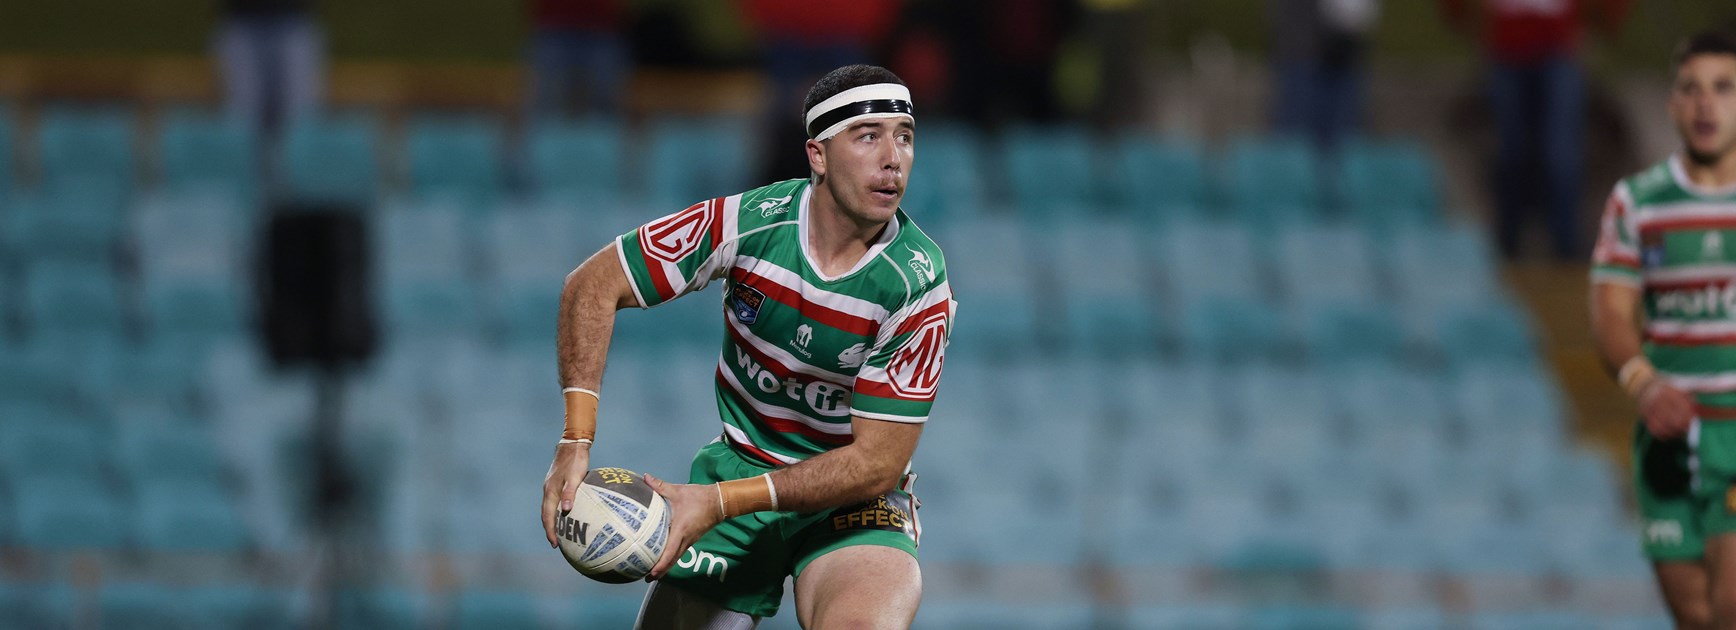 Five Grand Finalists, two names return in NSW Cup Team of the Year